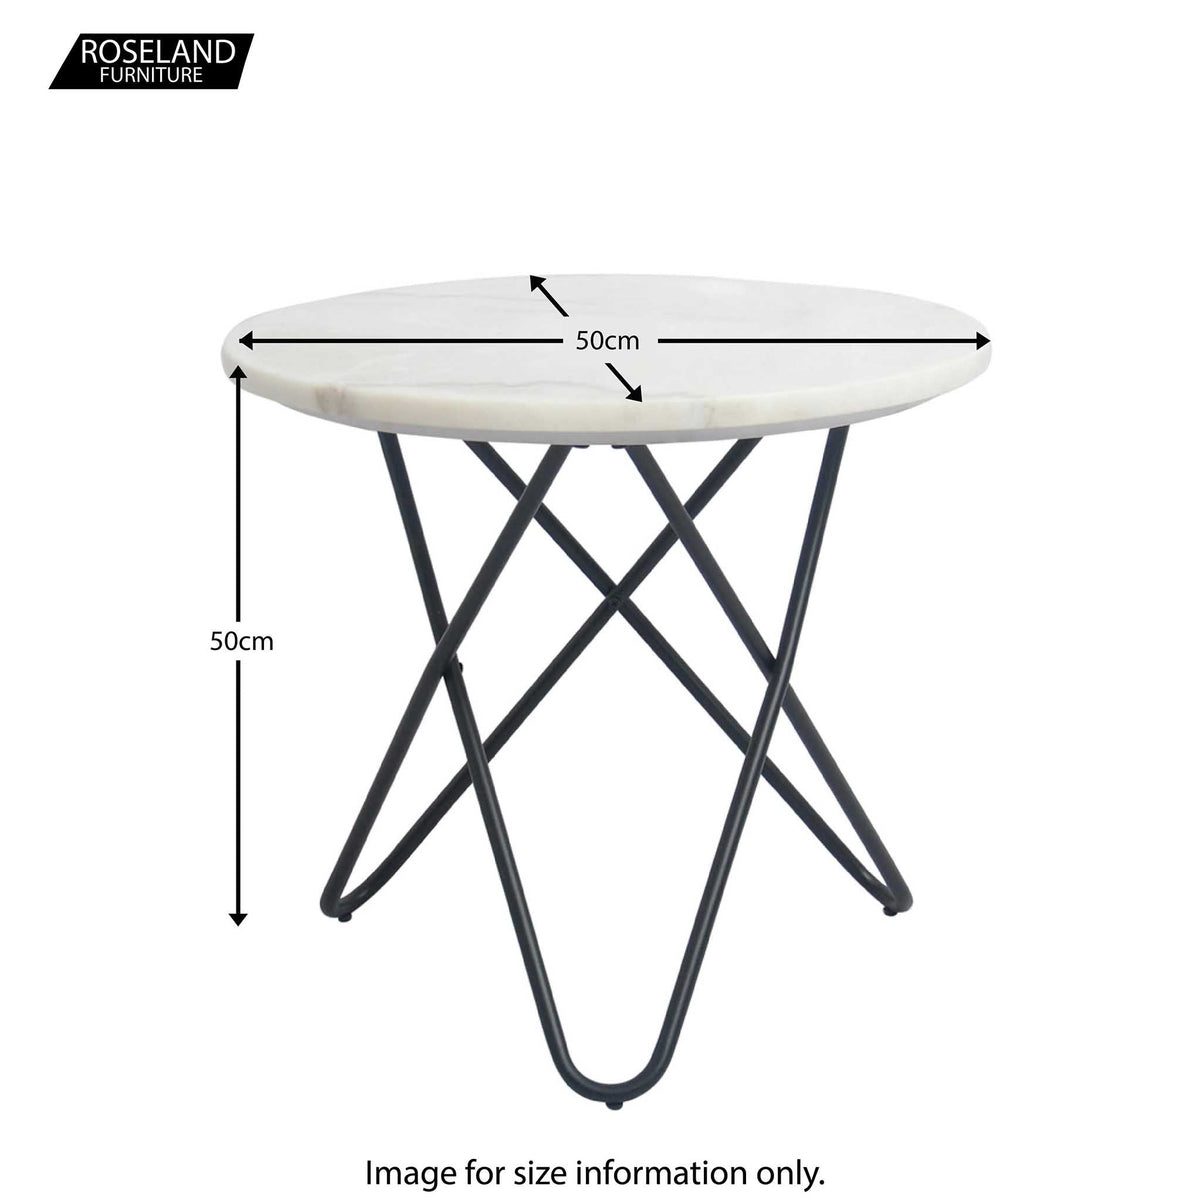 Heston White Marble Side Table - Size Guide